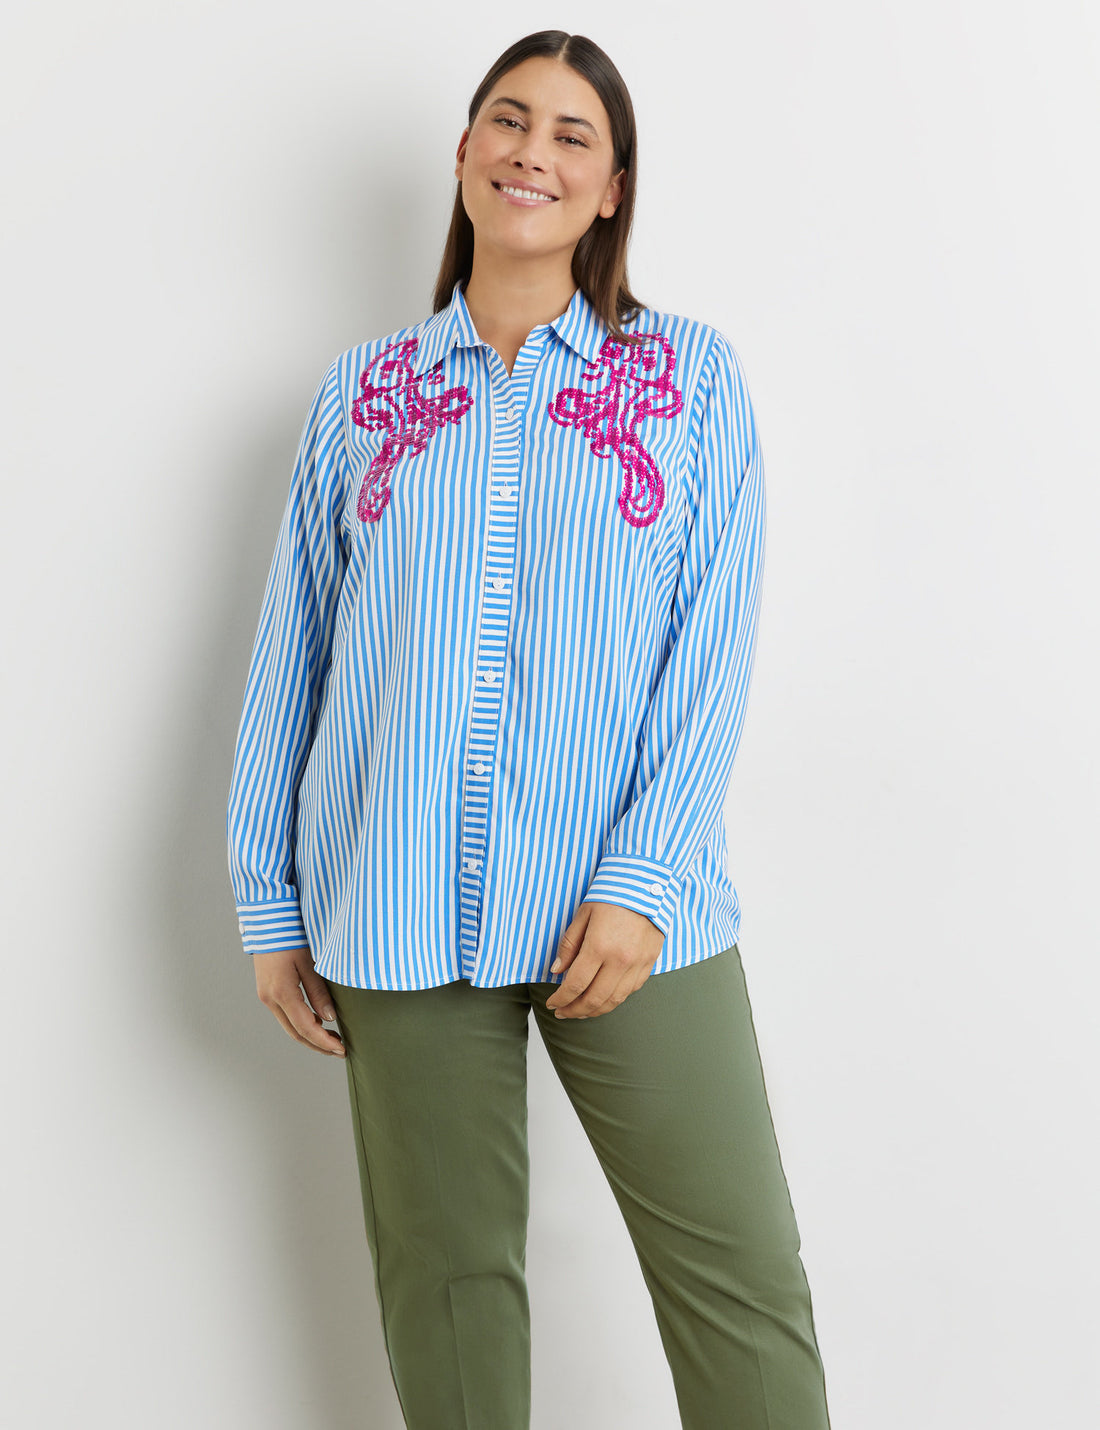 Striped Blouse With Sequin Embellishment_460001-21002_8822_01